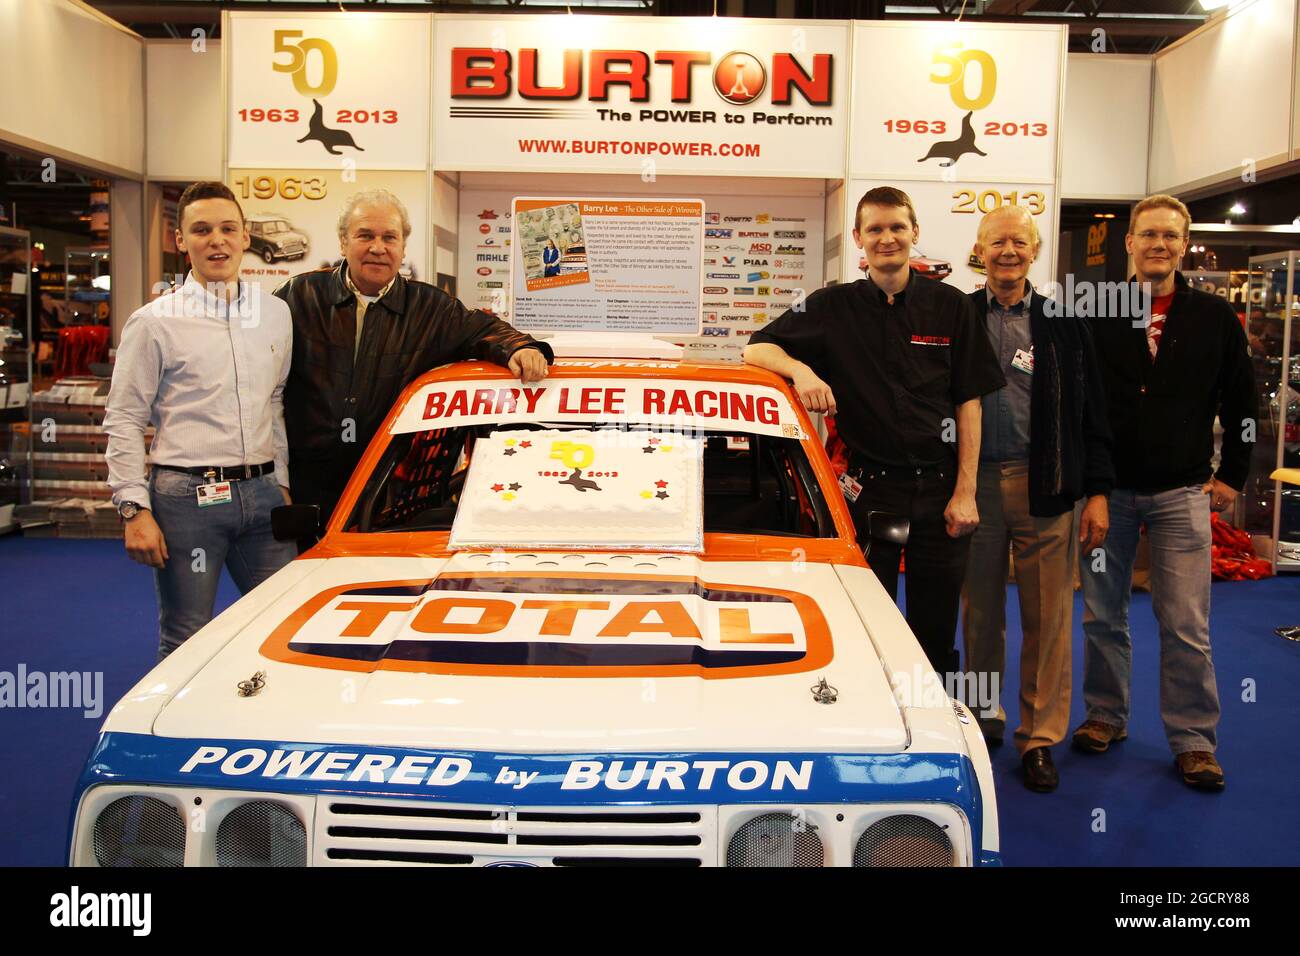 Barry Lee (GBR) (Left) celebrates 50 years of racing at the Burton stand.  Autosport International, Thursday 10th January 2013. National Exhibition  Centre, Birmingham, England Stock Photo - Alamy